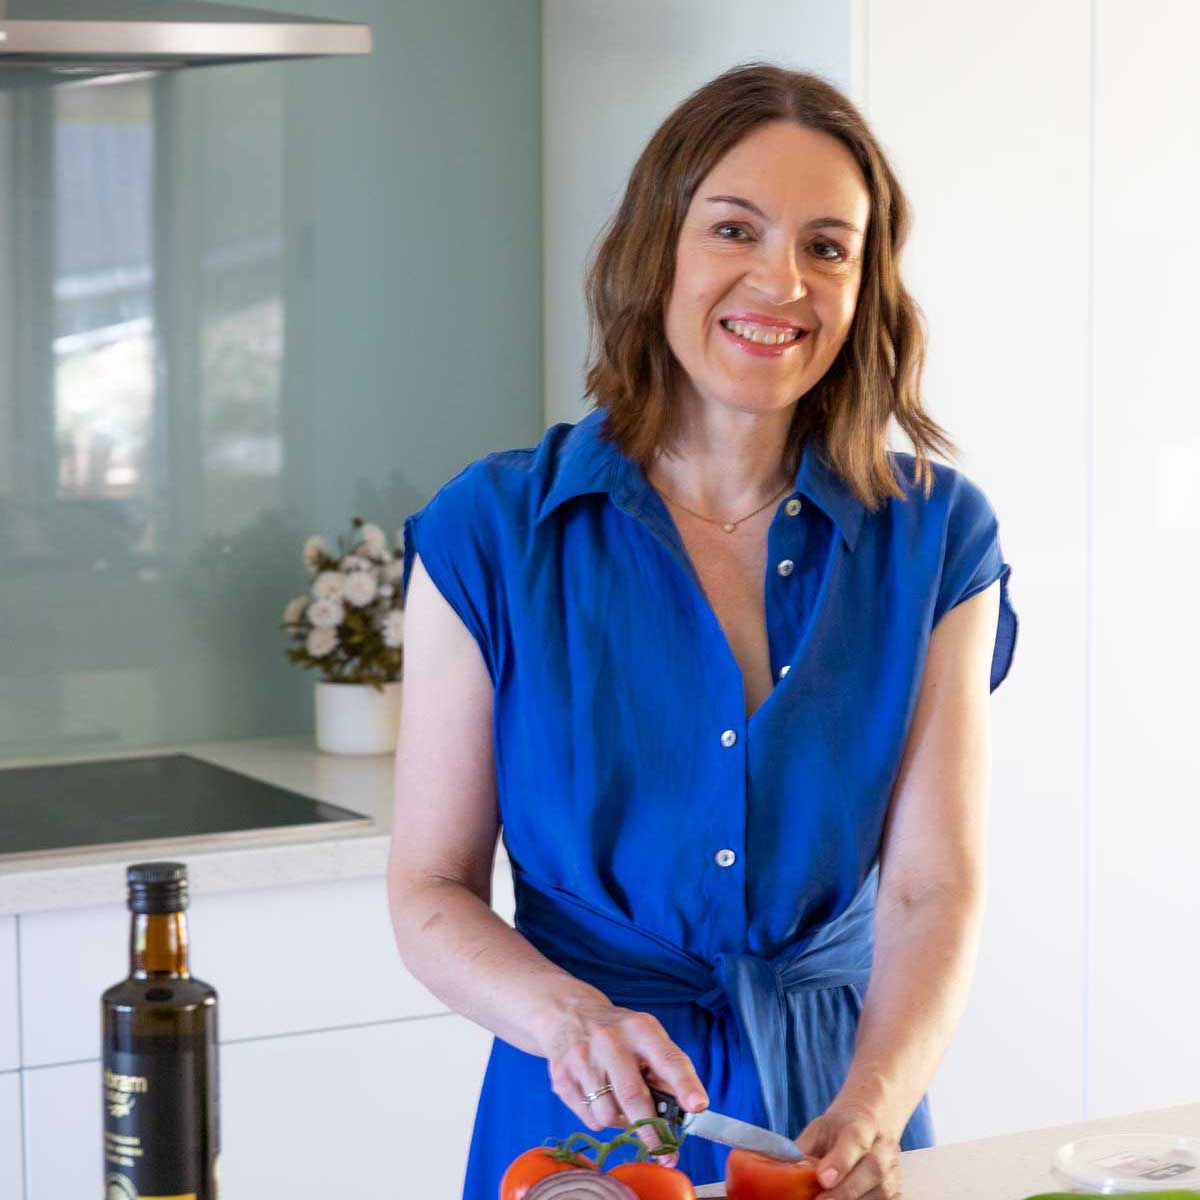 A square image of Helen Schofield, owner of food blog Scrummy Lane, standing at her bench in the kitchen smiling and wearing a blue dress and chopping tomatoes.